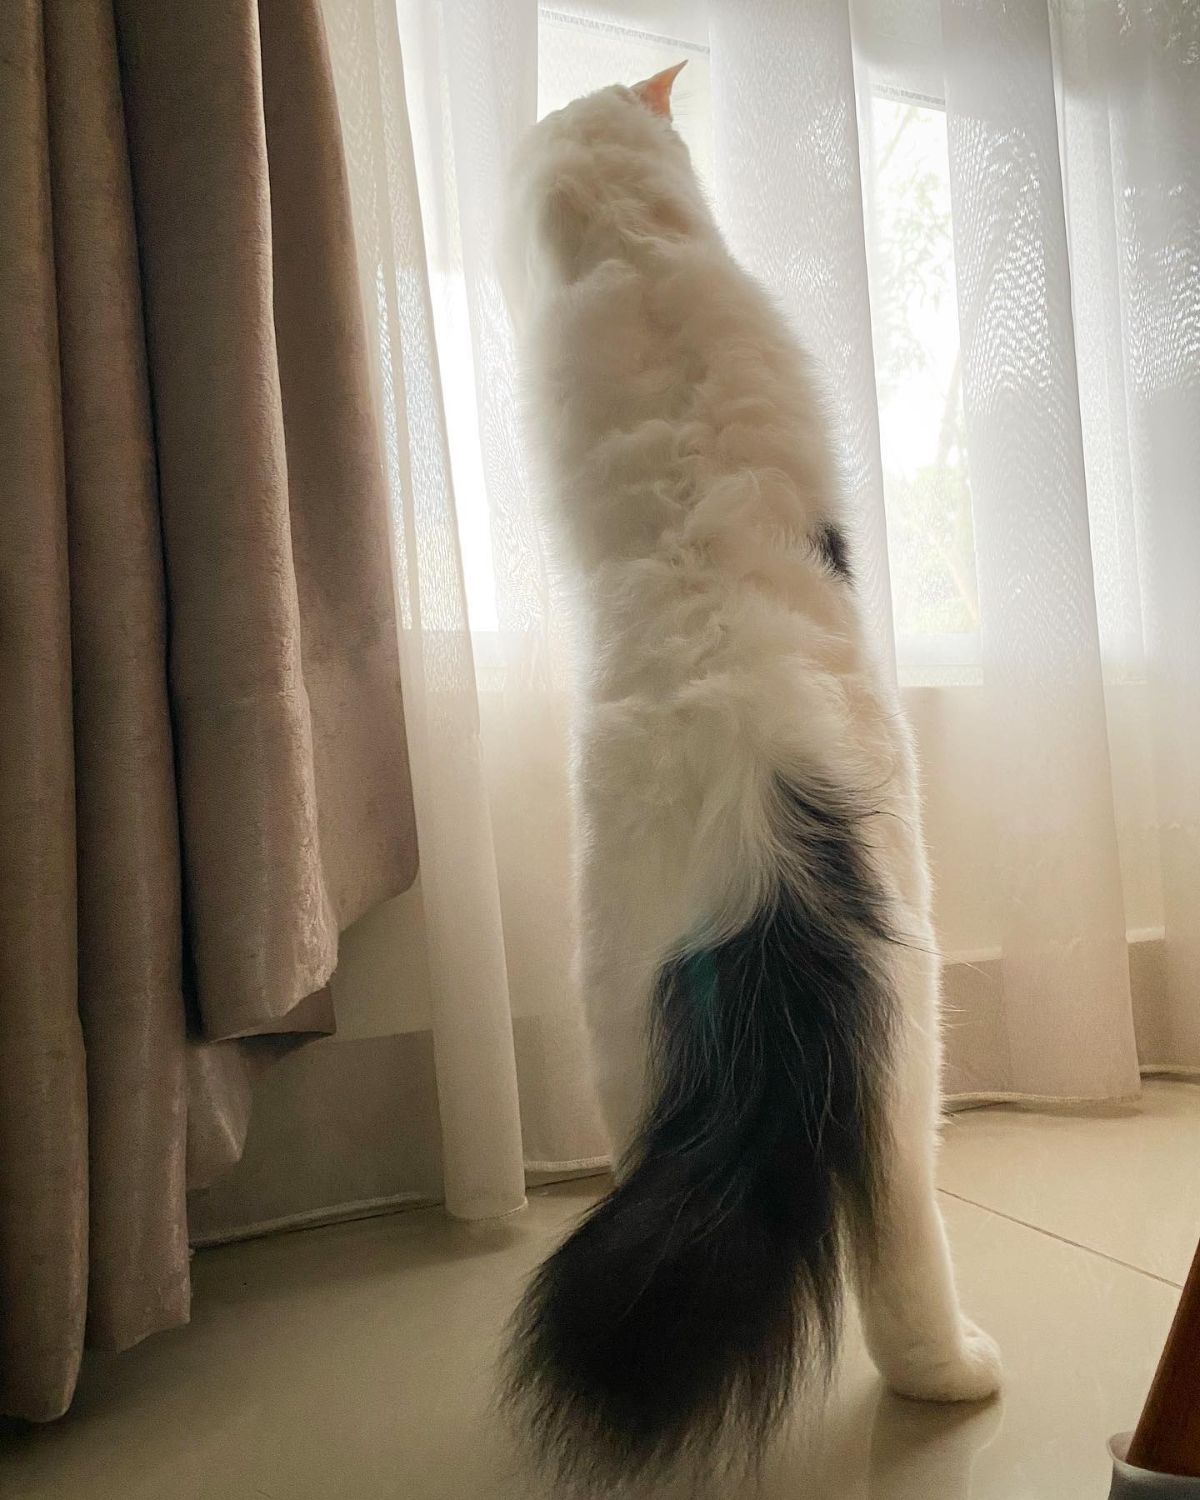 white and black cat standing on hind legs and looking out the window